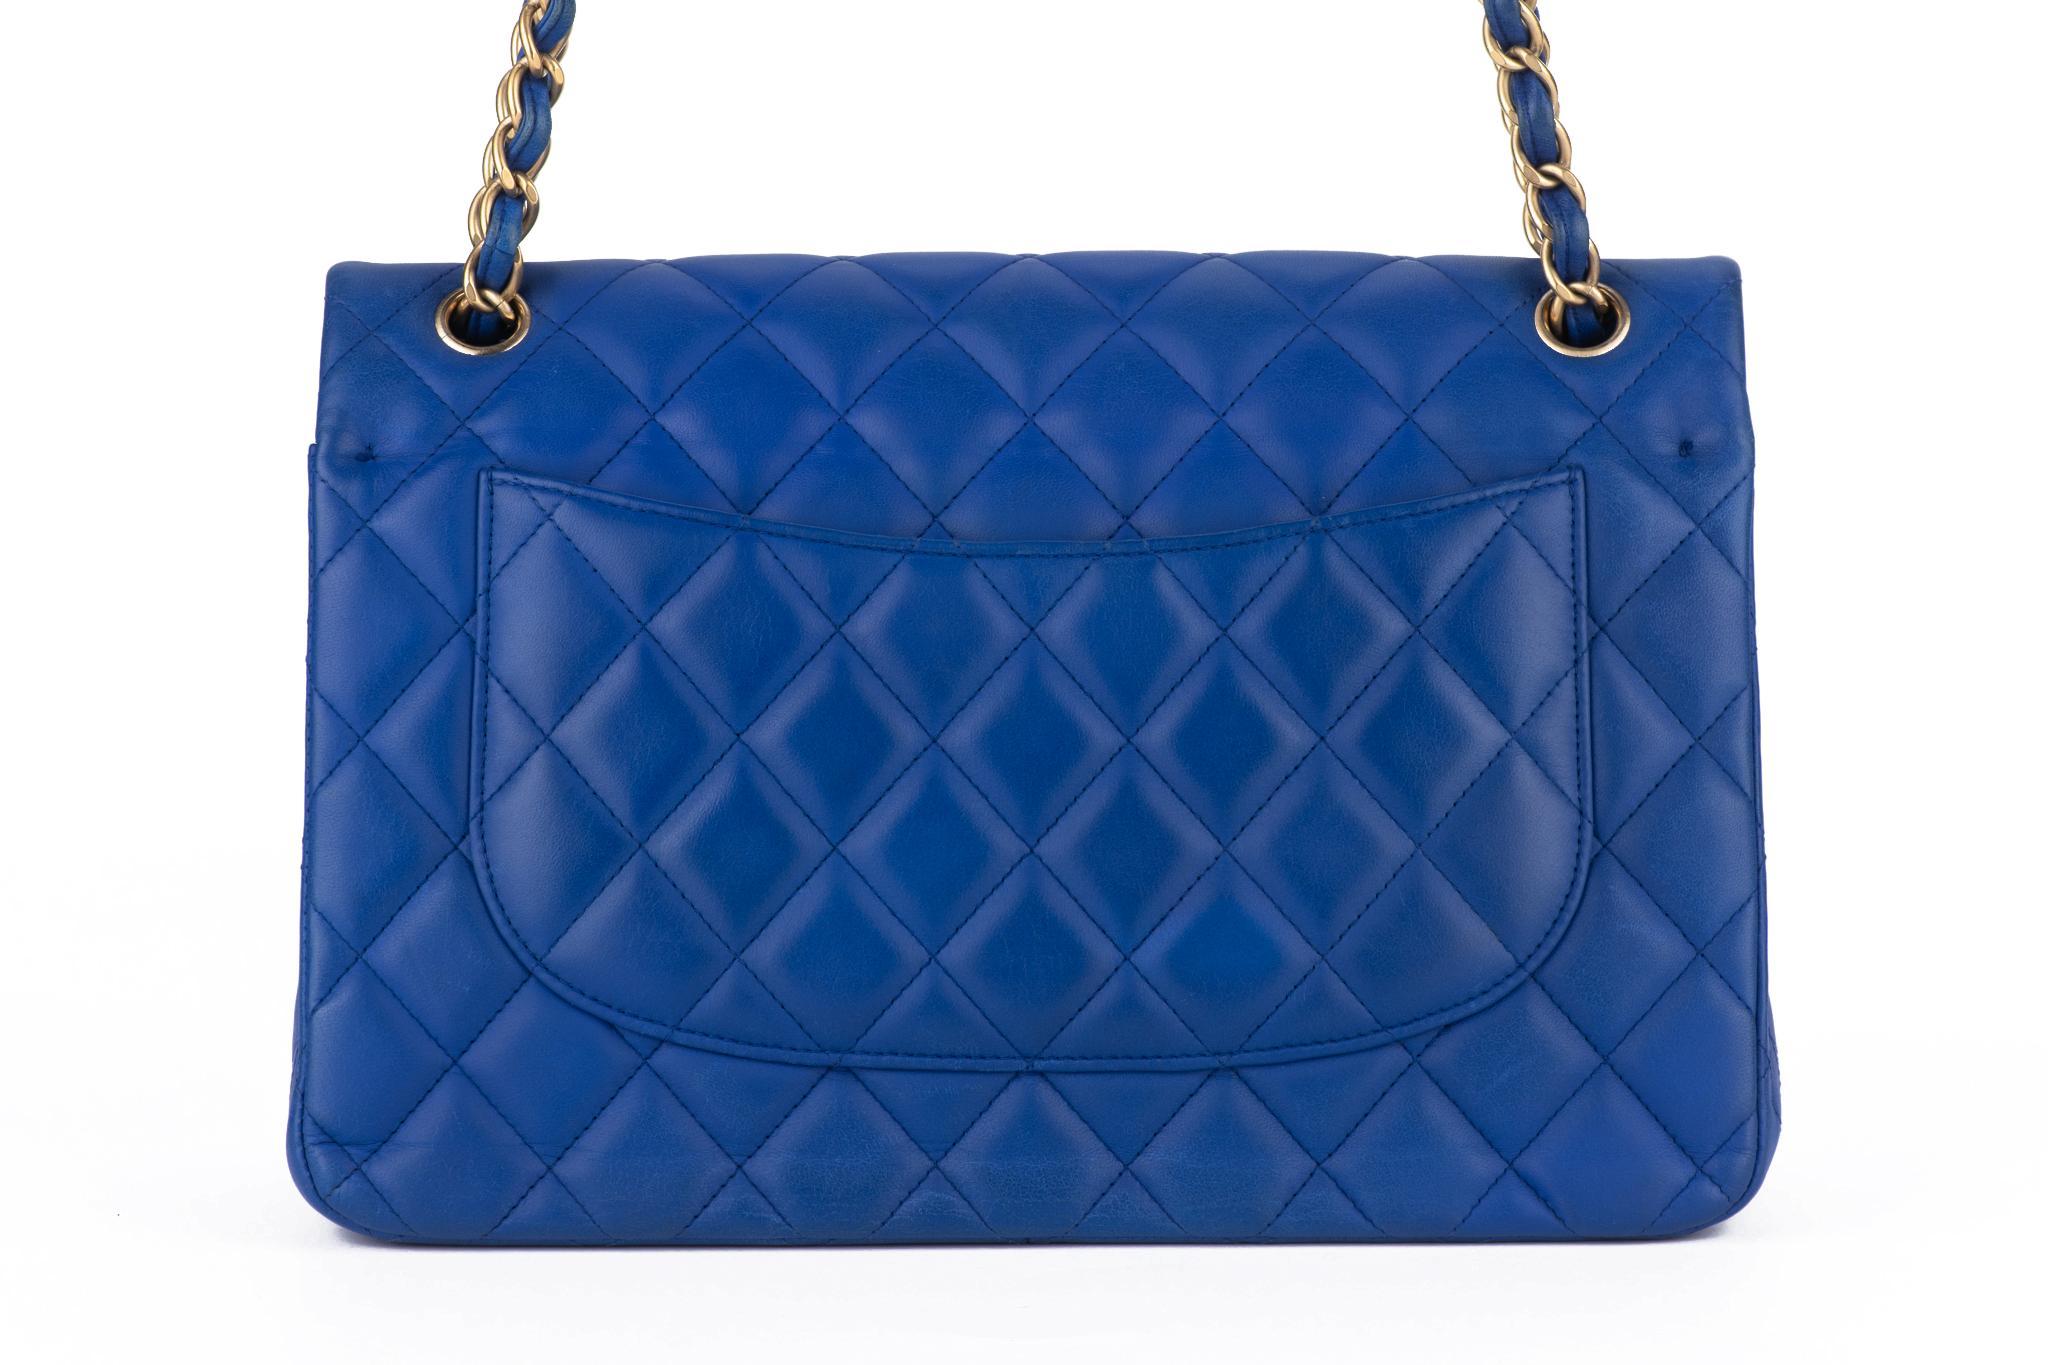 Chanel Jumbo Blue Quilted Double Flap For Sale 1